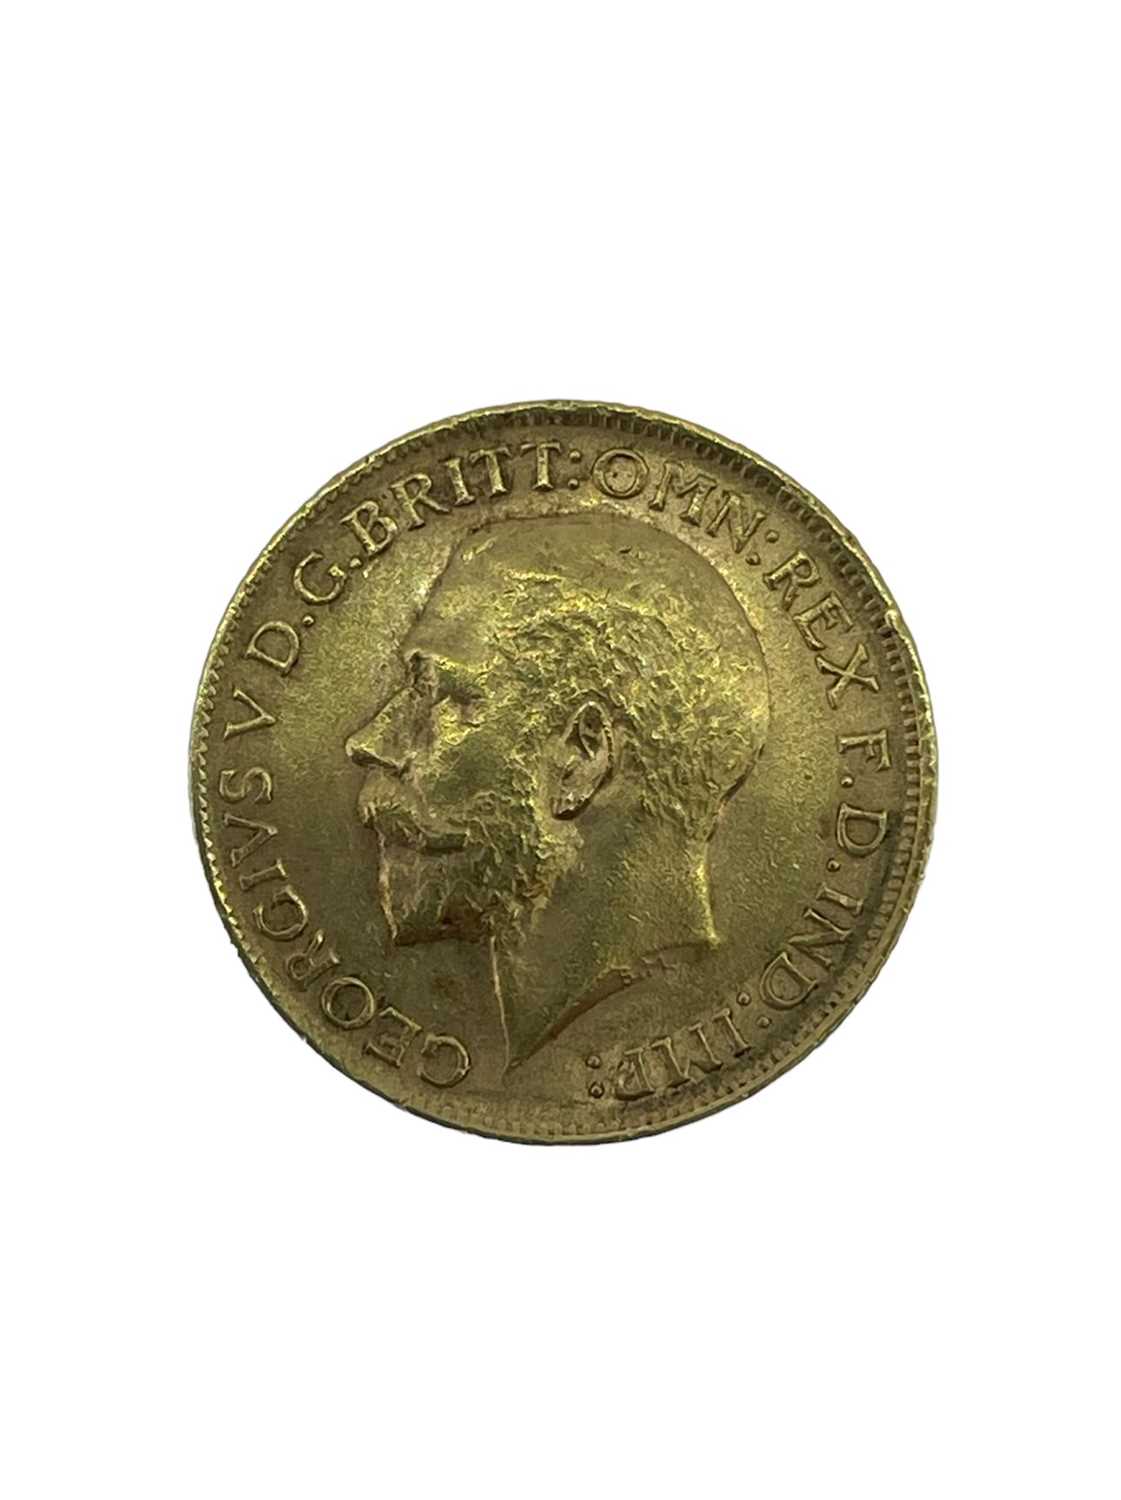 GEORGE V GOLD SOVEREIGN, 1913, 8.0gms Provenance: private collection Carmarthenshire, consigned - Image 2 of 2